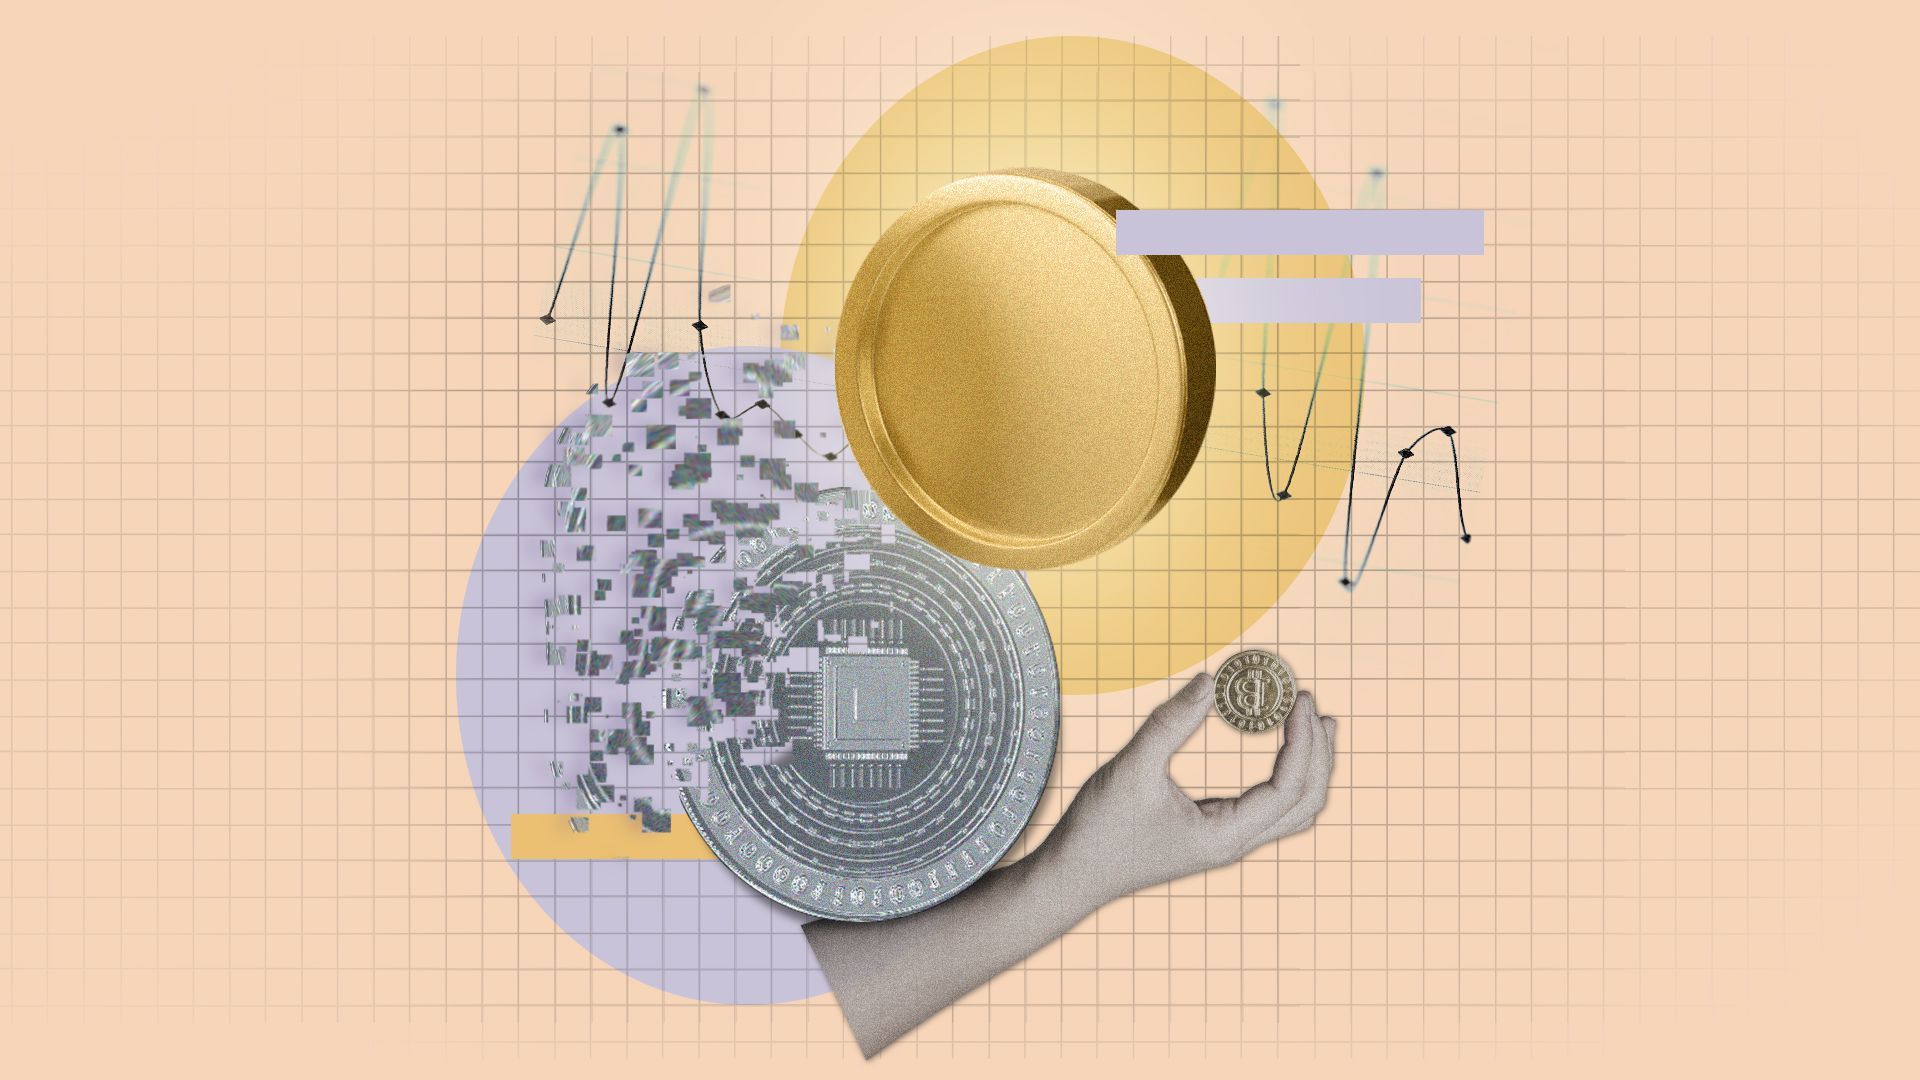 Illustration of two coins with one becoming pixelated, a hand holding a coin, assorted shapes, a graph, and a grid.